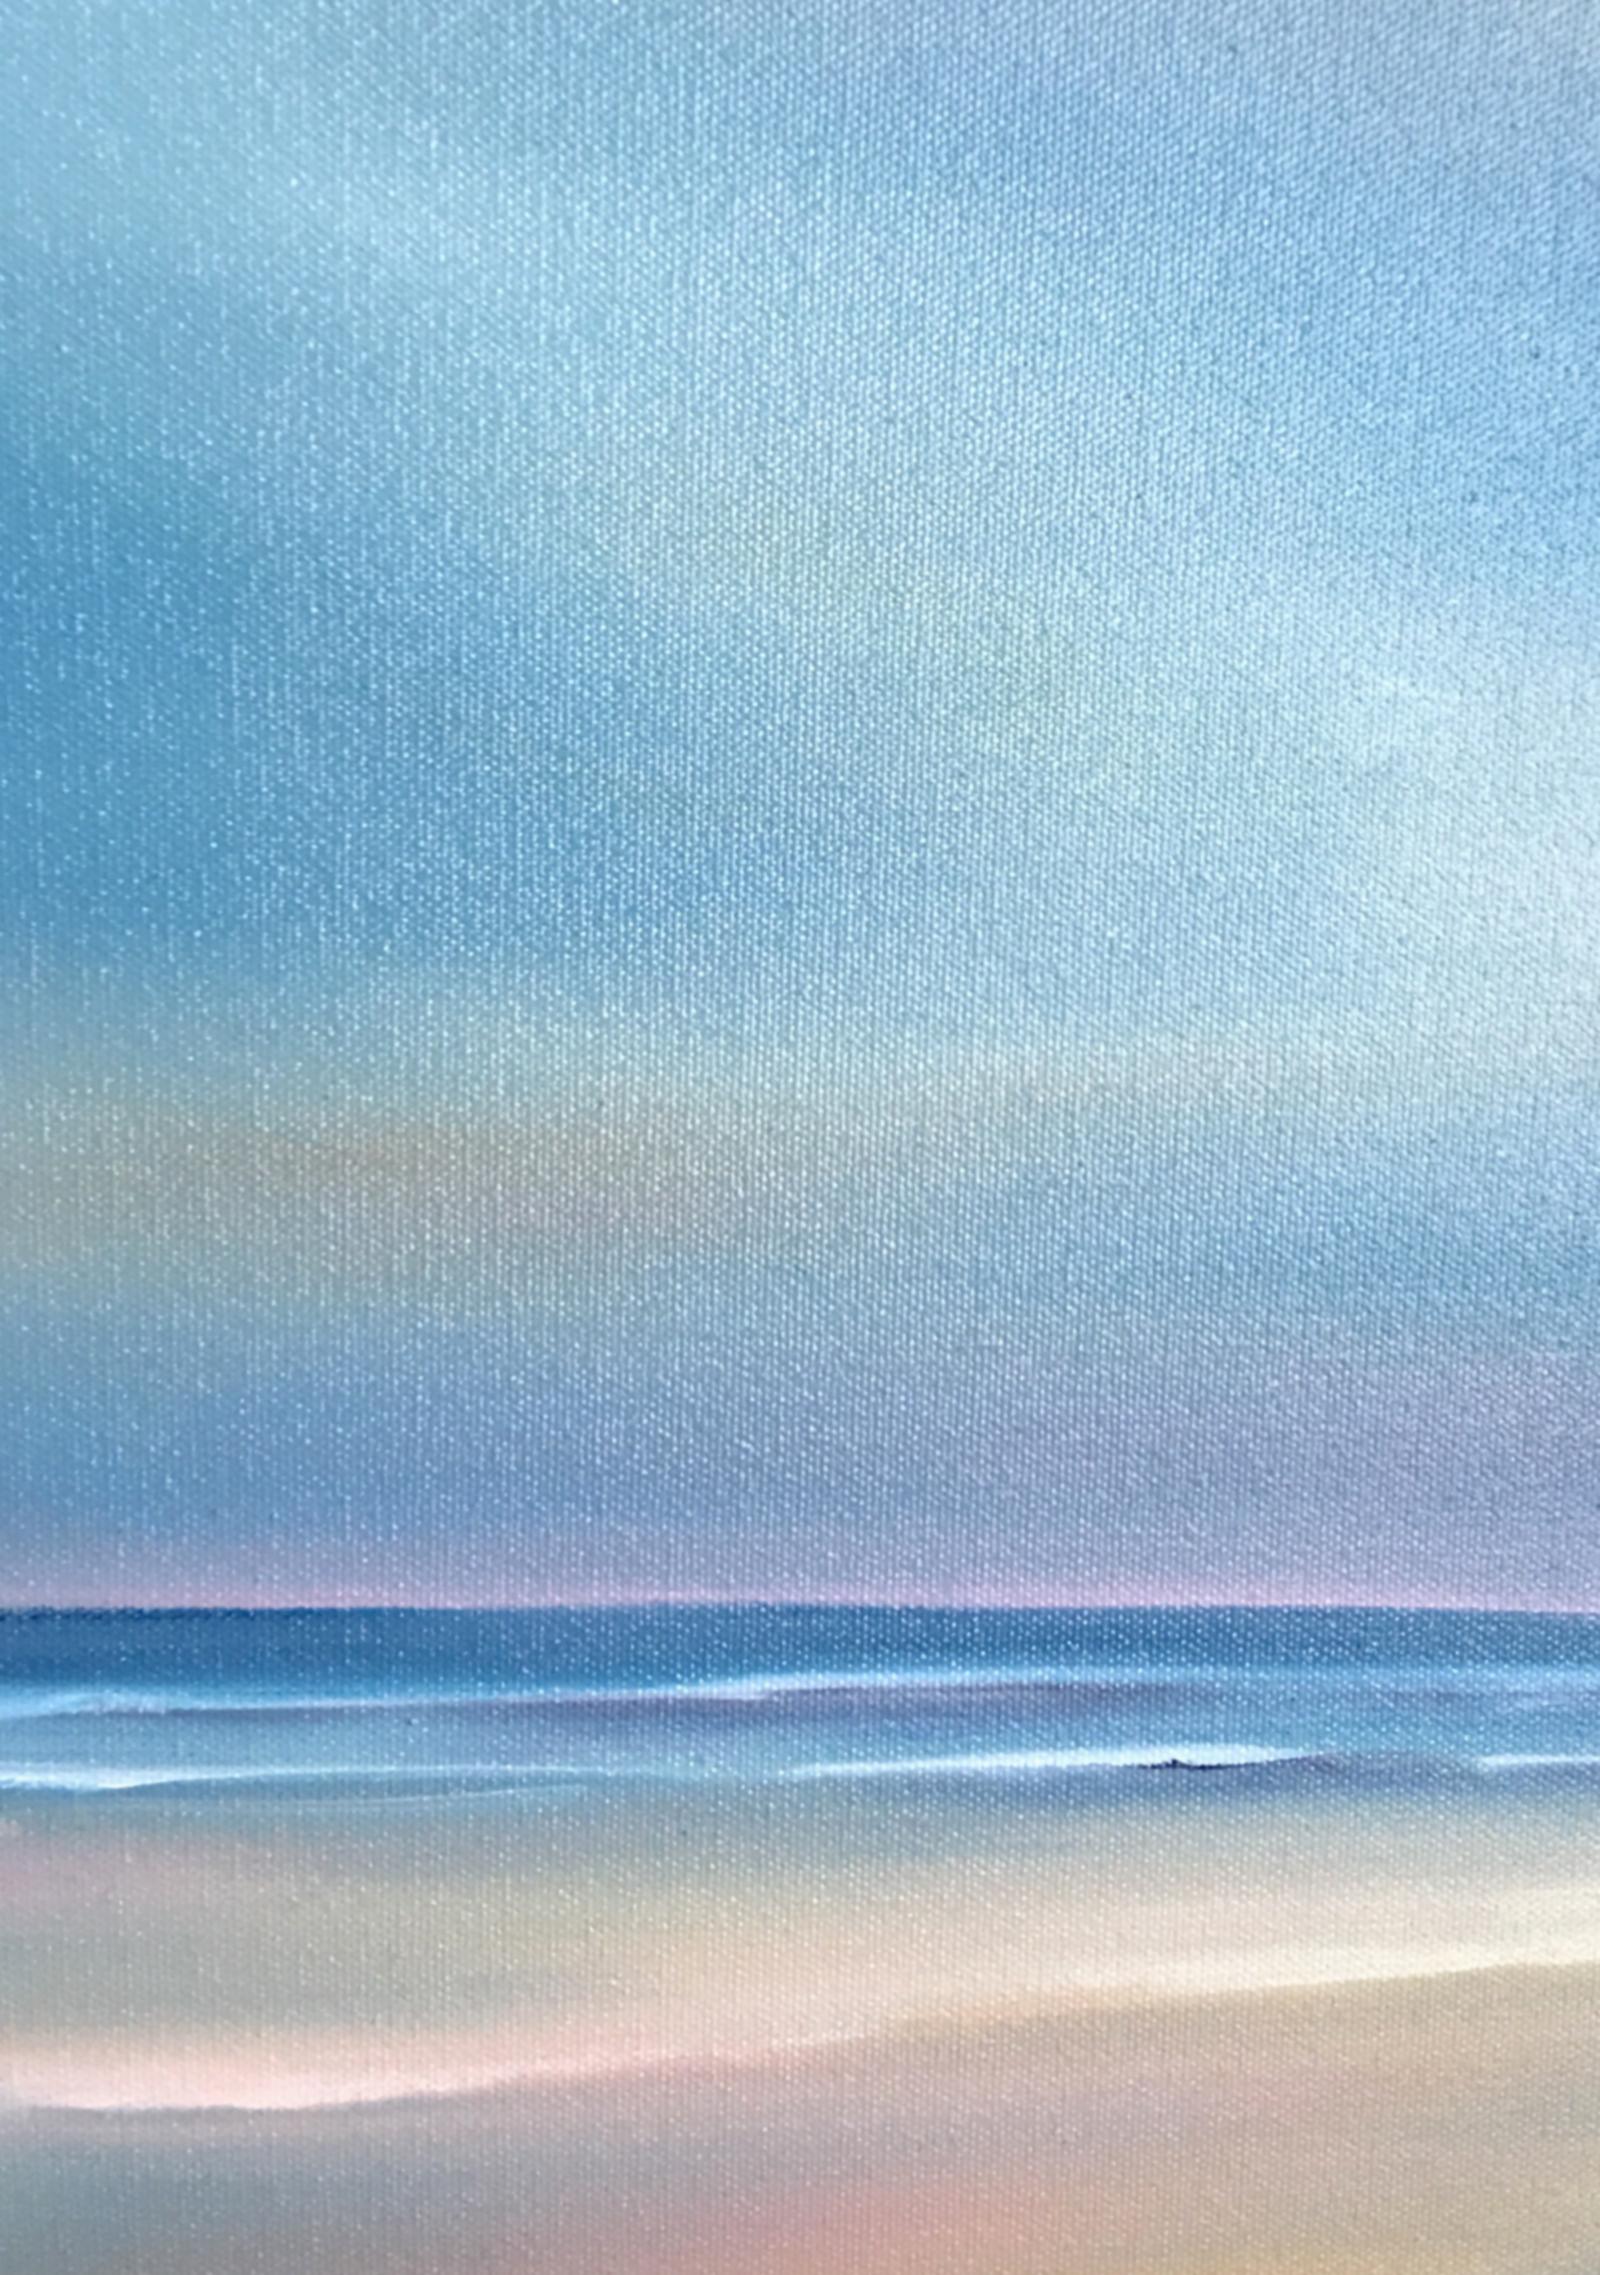 Beach Morning - Gray Landscape Painting by Nancy Hughes Miller